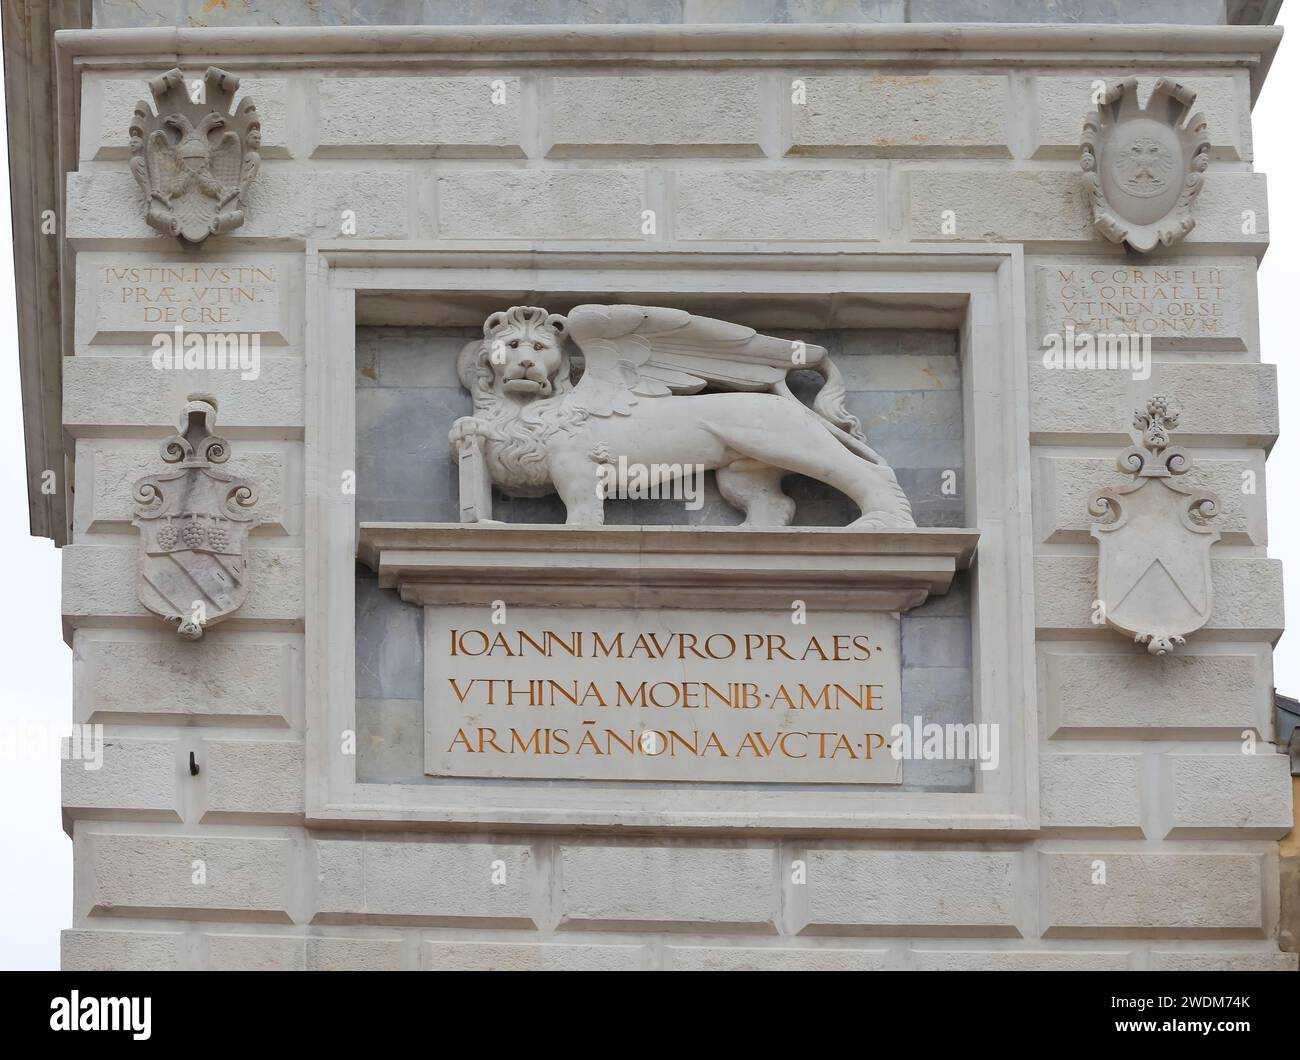 Udine, UD, Italy - December 27, 2023: Winged St. Marks Lion and text describing the person who governed Venice in the 16th century Stock Photo